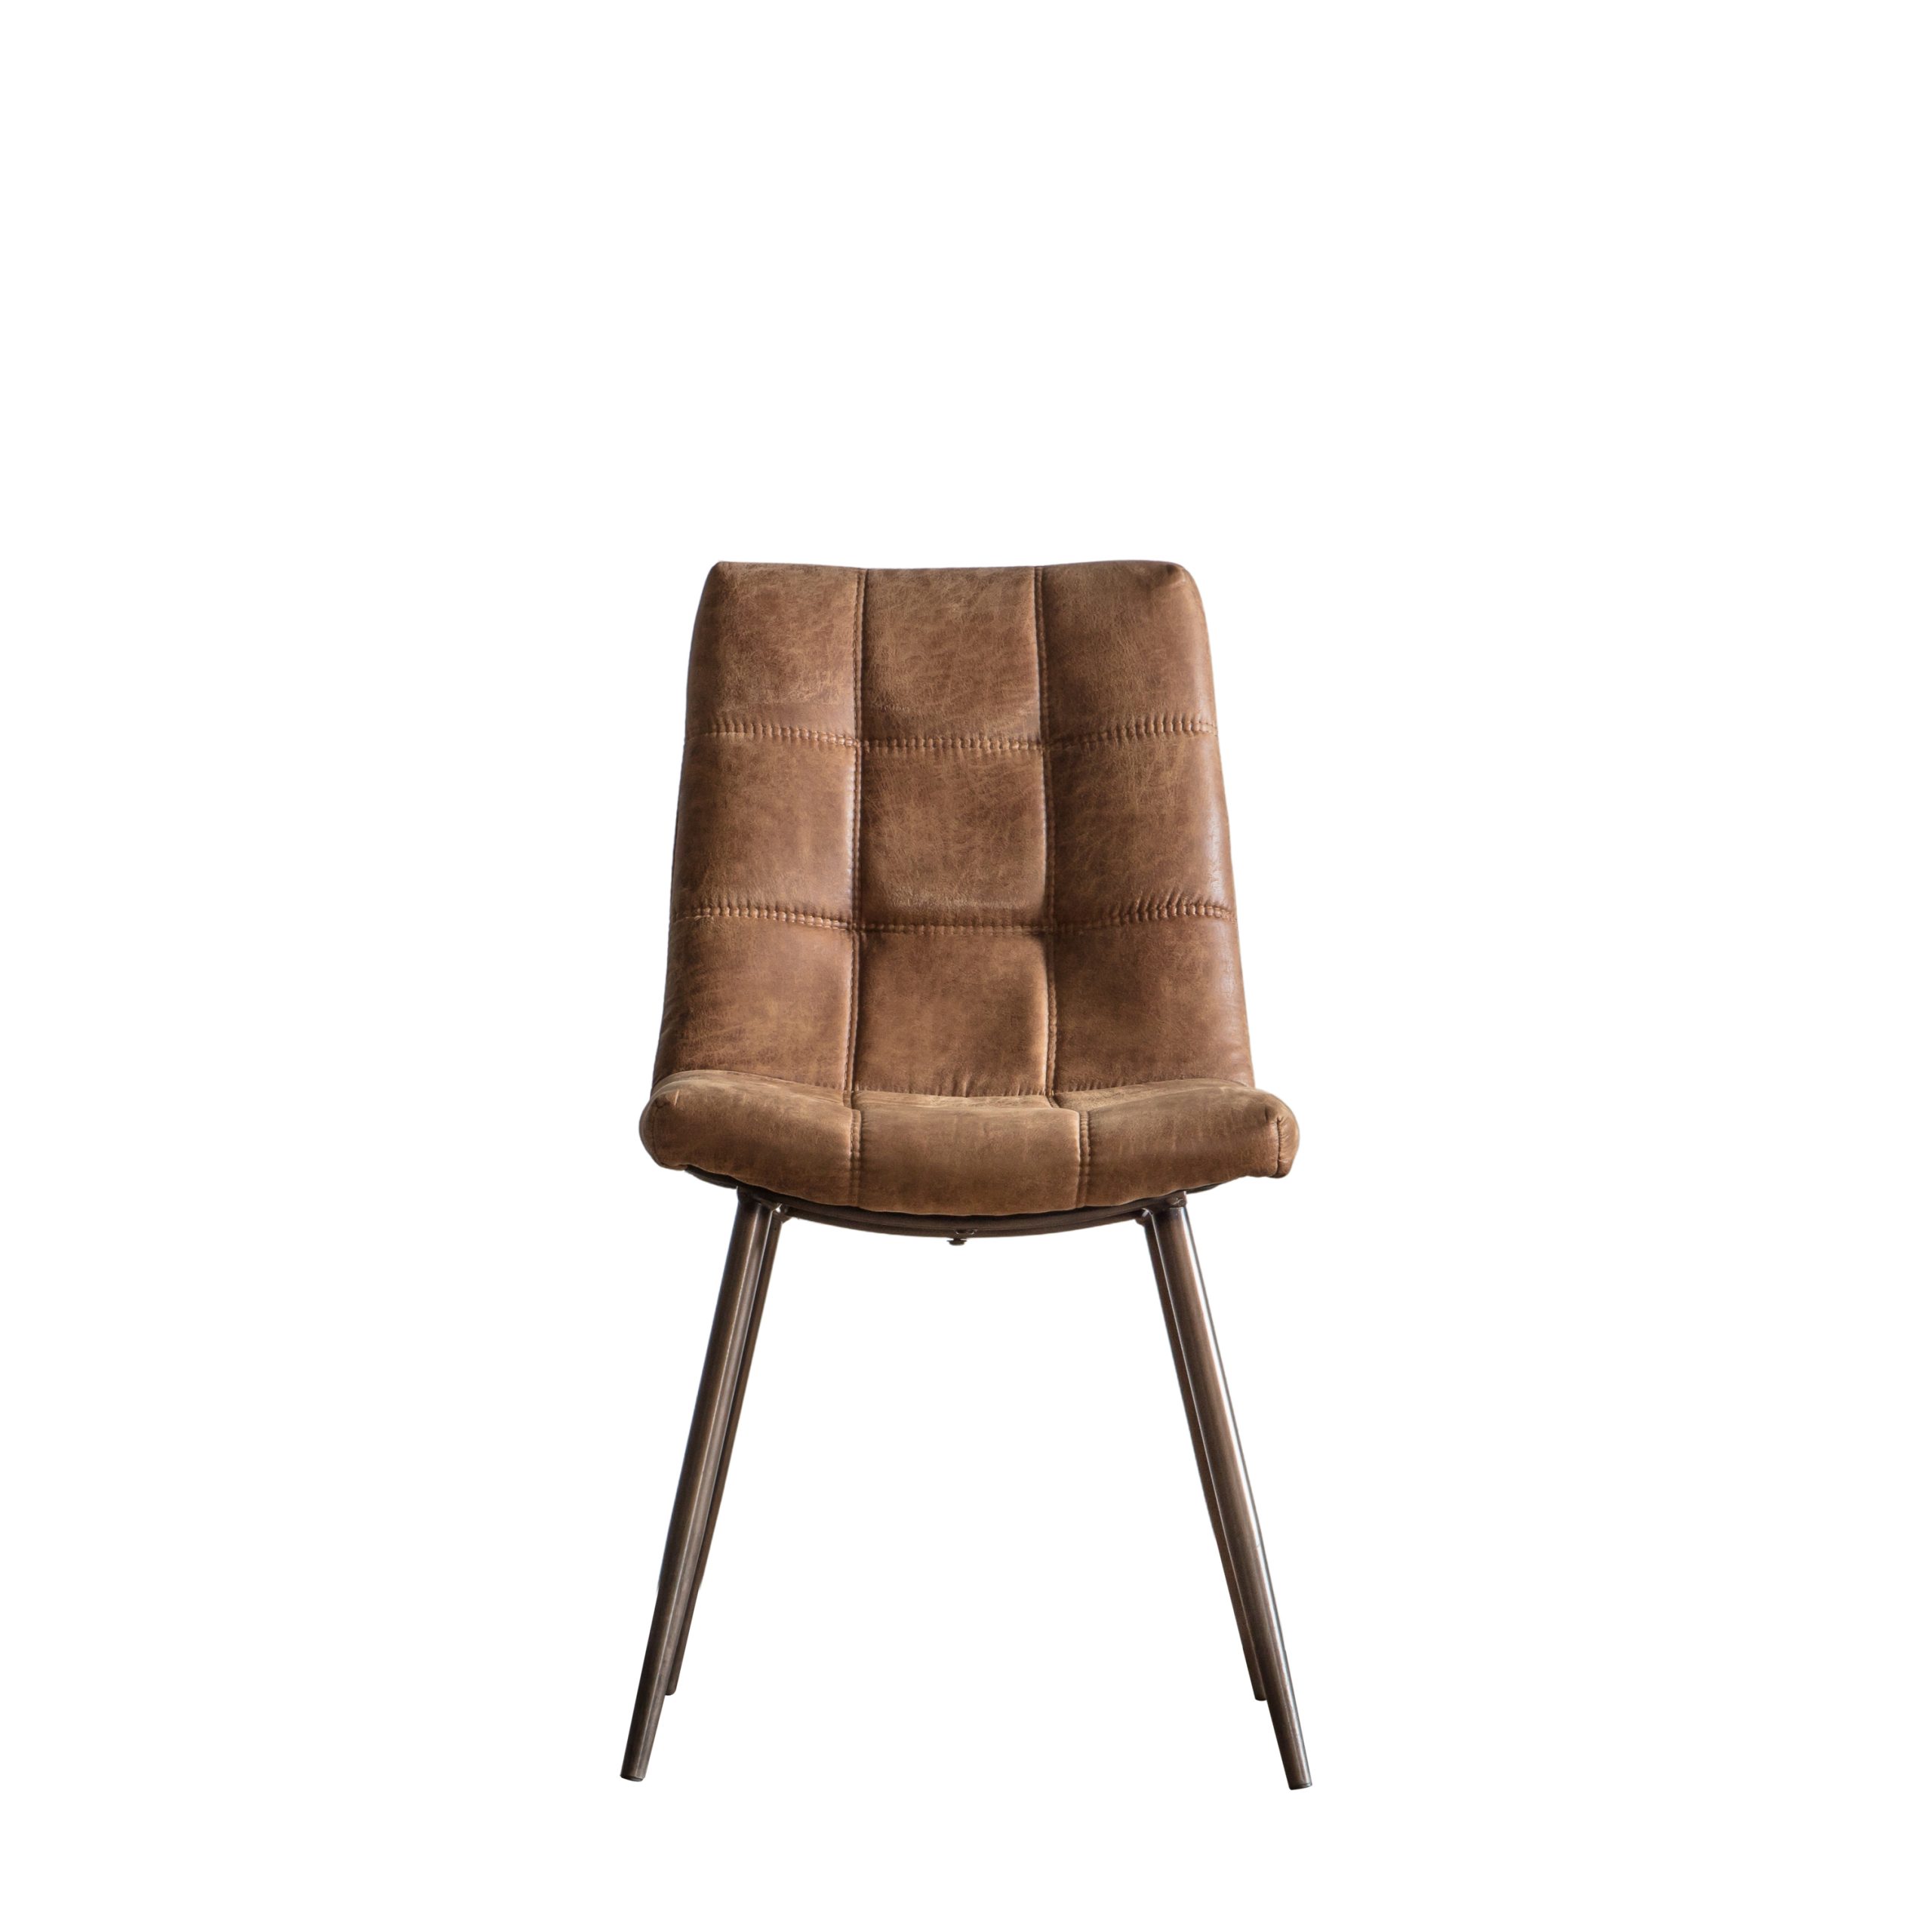 Gallery Direct Darwin Brown Chair (Set of 2)